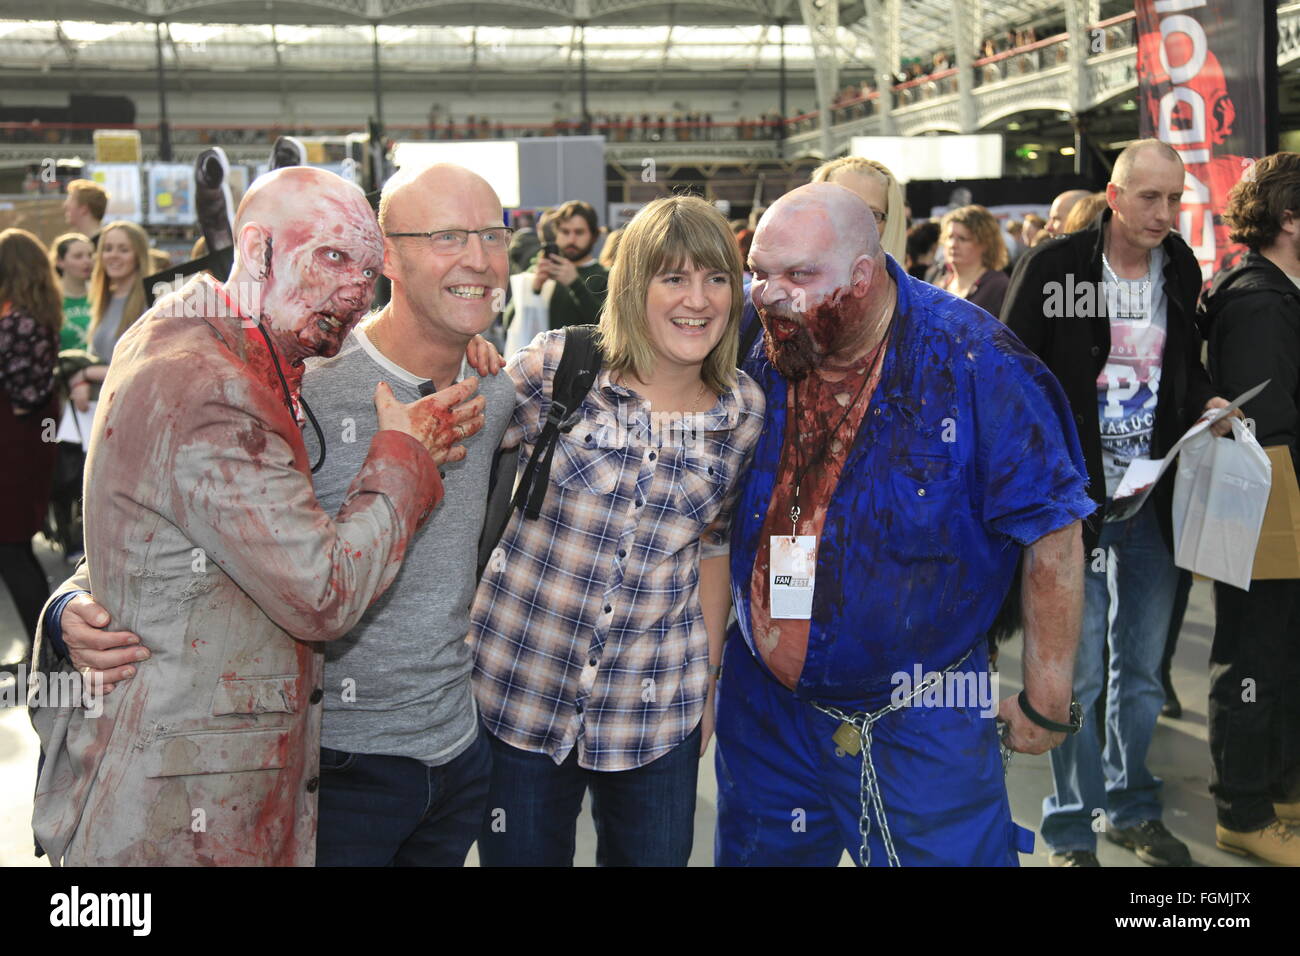 Fans posing with zombies attending London, UK. 21st February, 2016. Walking Dead Convention Walker Stalker Con Olympia London 21/02/2016 walking dead fans gather to see stars of the show and stalls selling everything to do with the hit zombie American show photo ops with a star or zombie. cosplayers & undead walkers roaming the event floor entertaining the crowds. Stalls selling make-up and characters from the show. Credit:  Paul Thompson/Alamy Live News Stock Photo